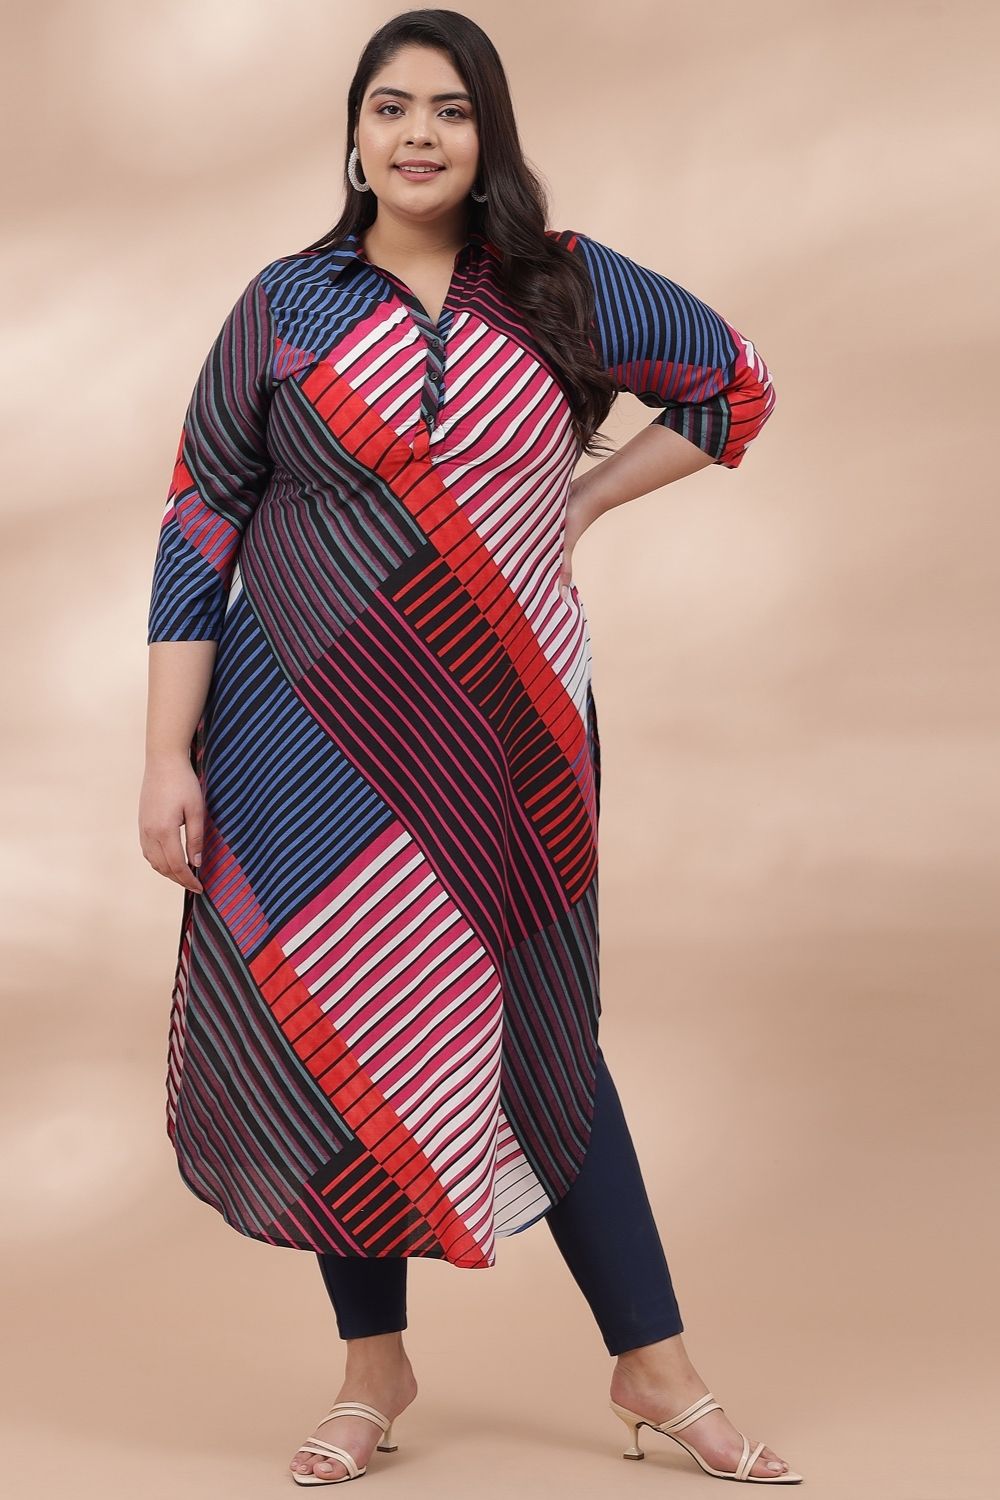 2023 Womens Designer Plus Size Casual Dresses With Bubble Sleeves And Fat  Skirt For Fashionable Ladies From Earthcn, $20.99